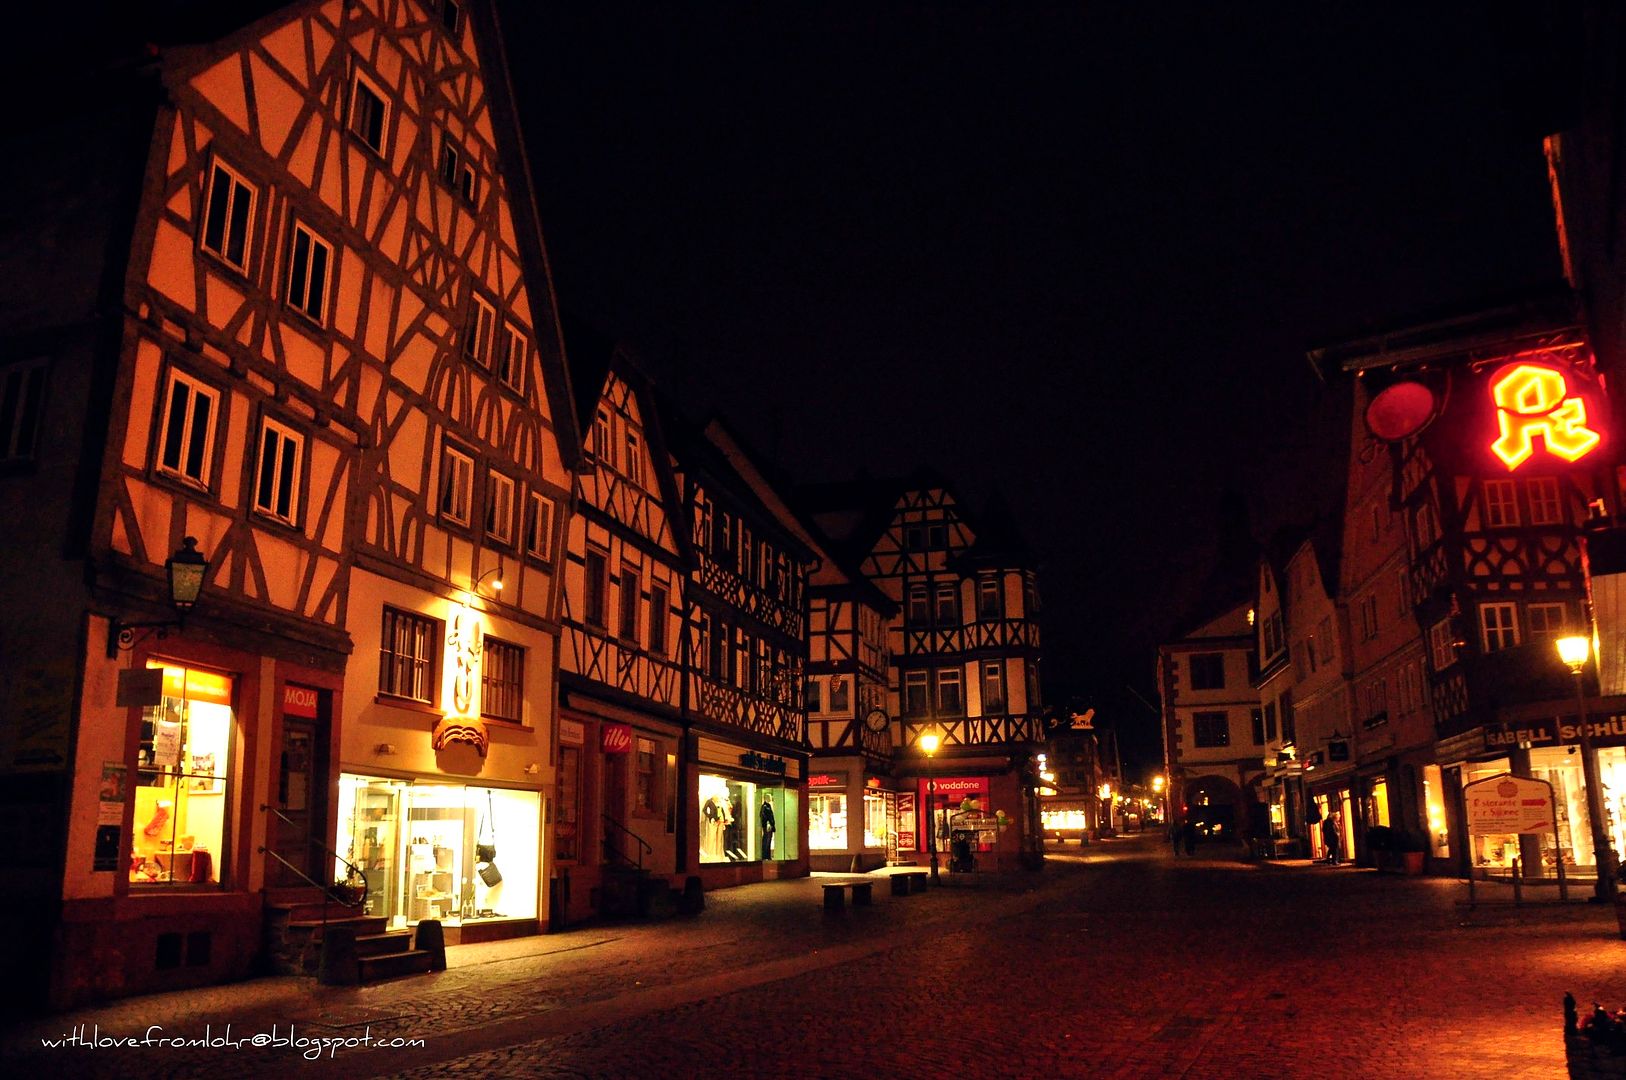 06.03.12, Now's the right time for evening strolls round the village..